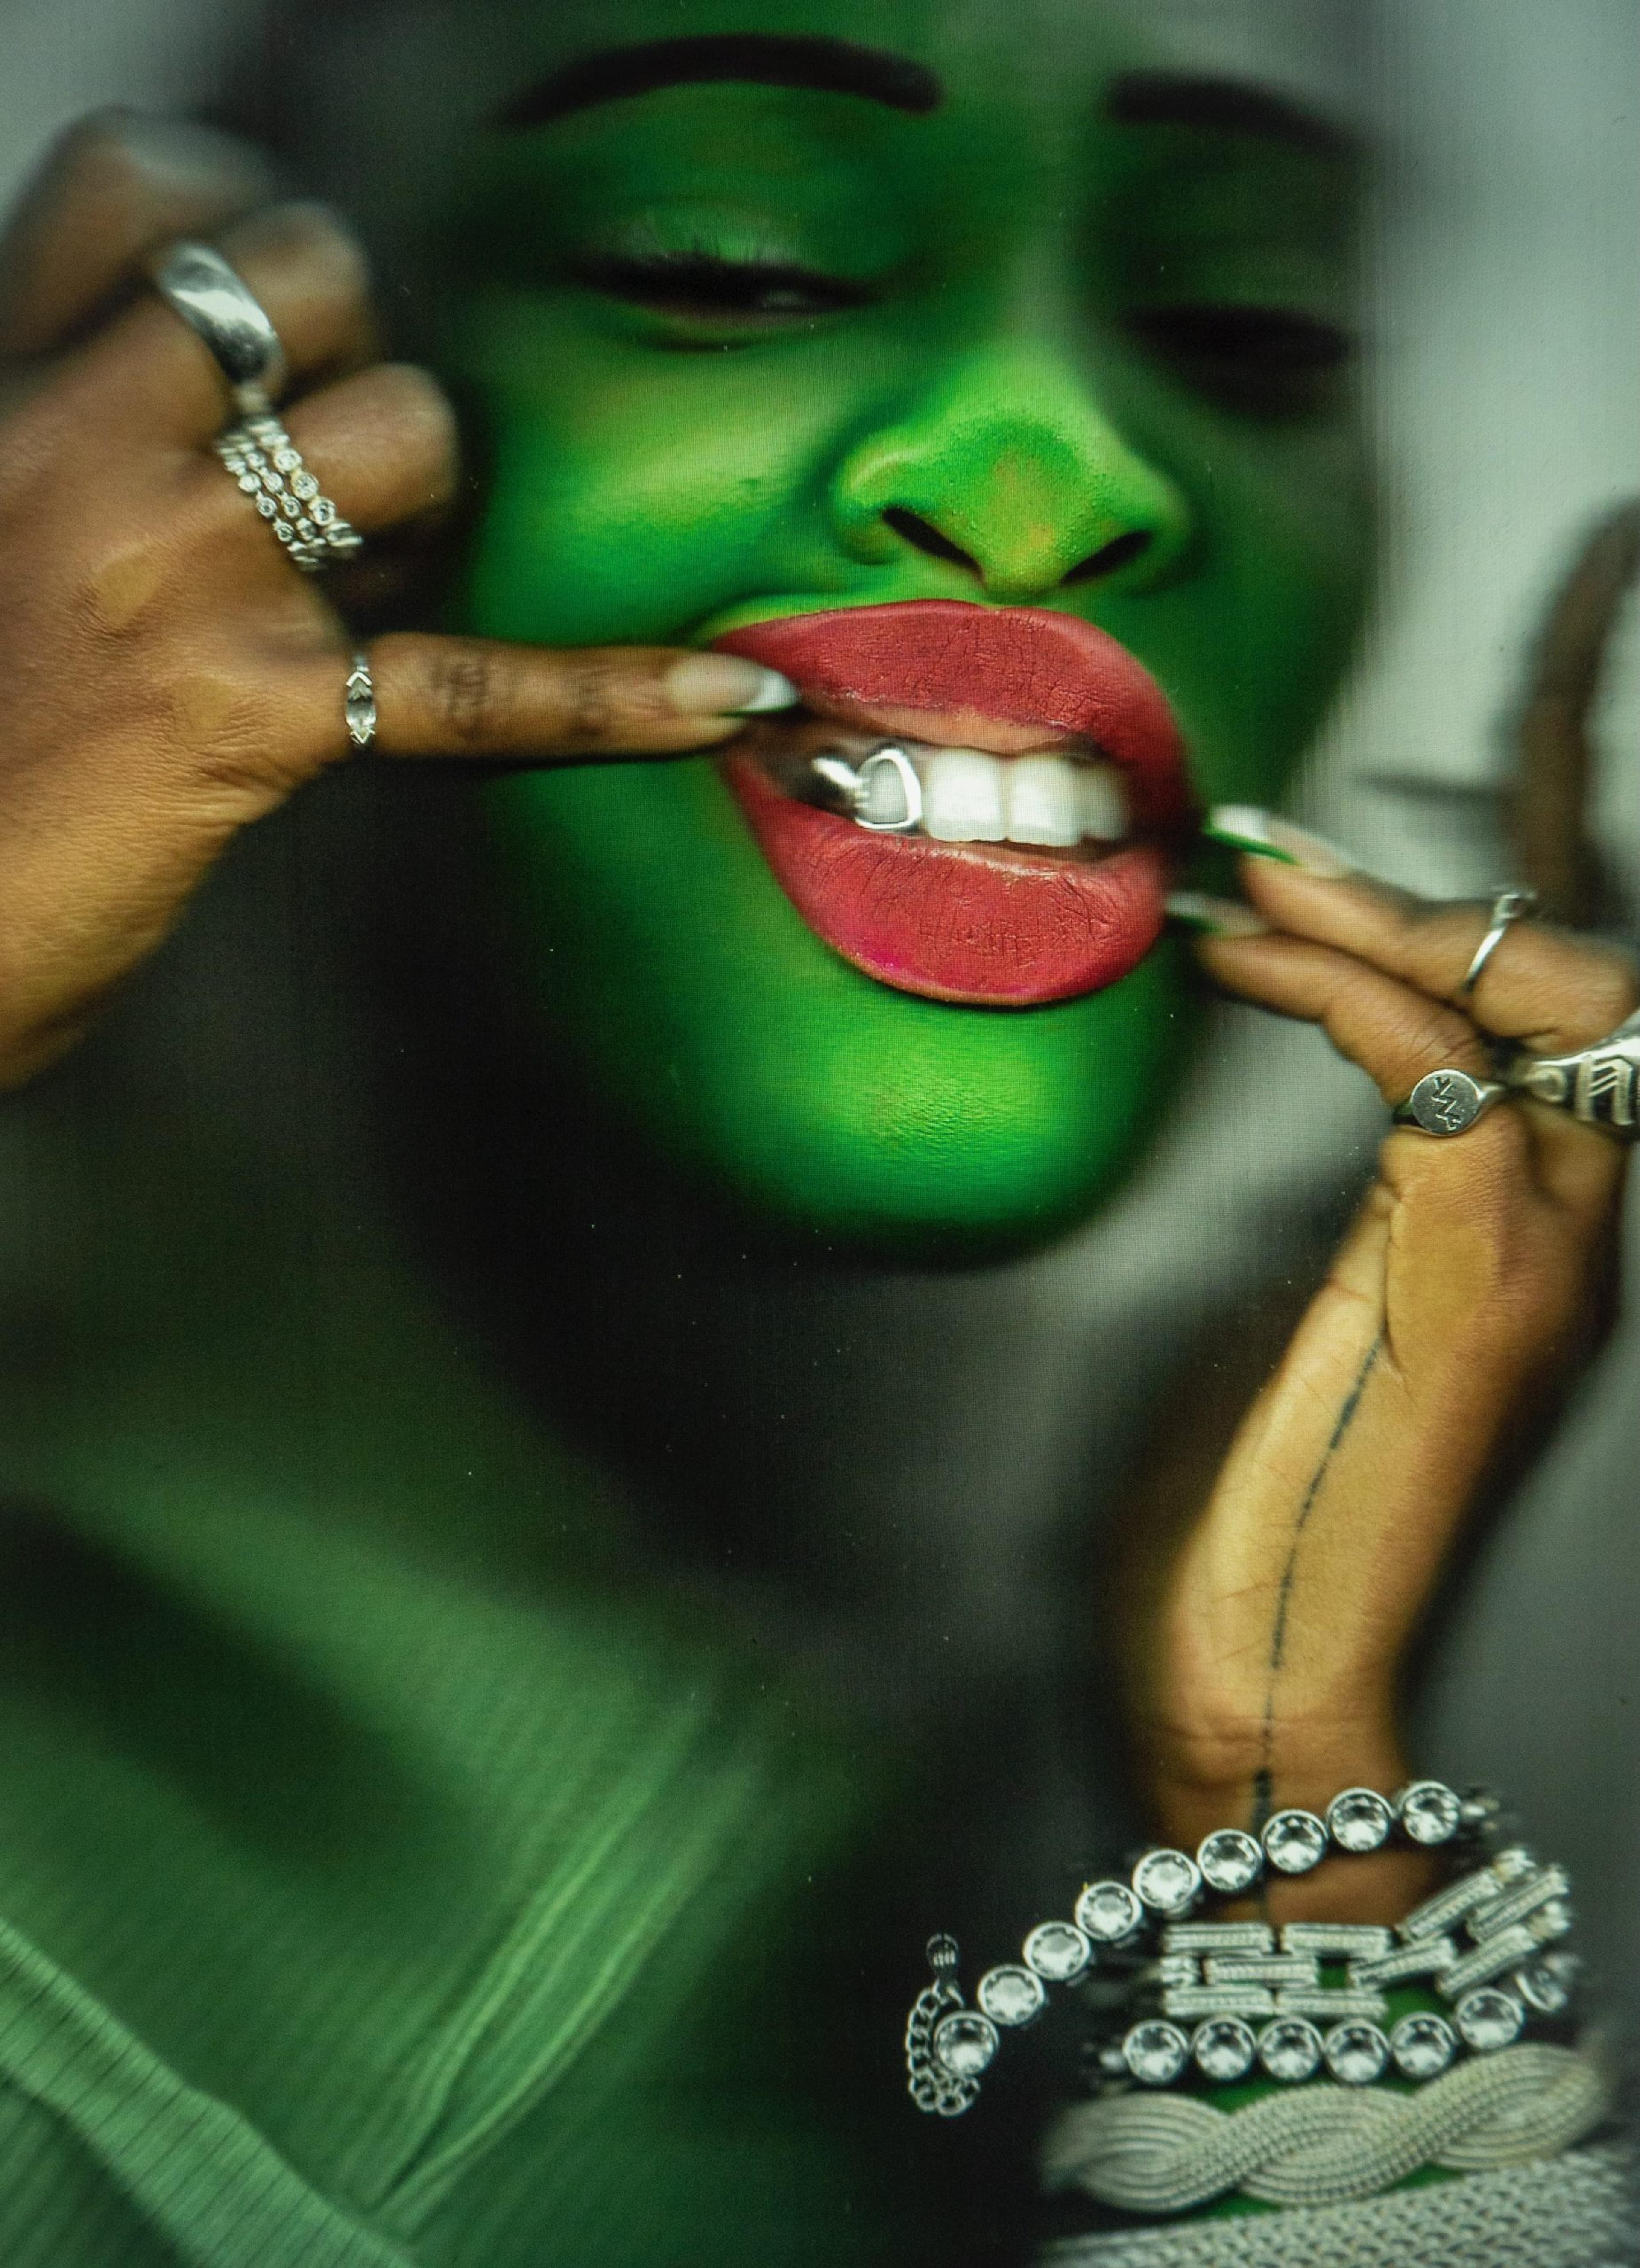 A close-up portrait of a woman covered in green paint, pressed up against a clear surface